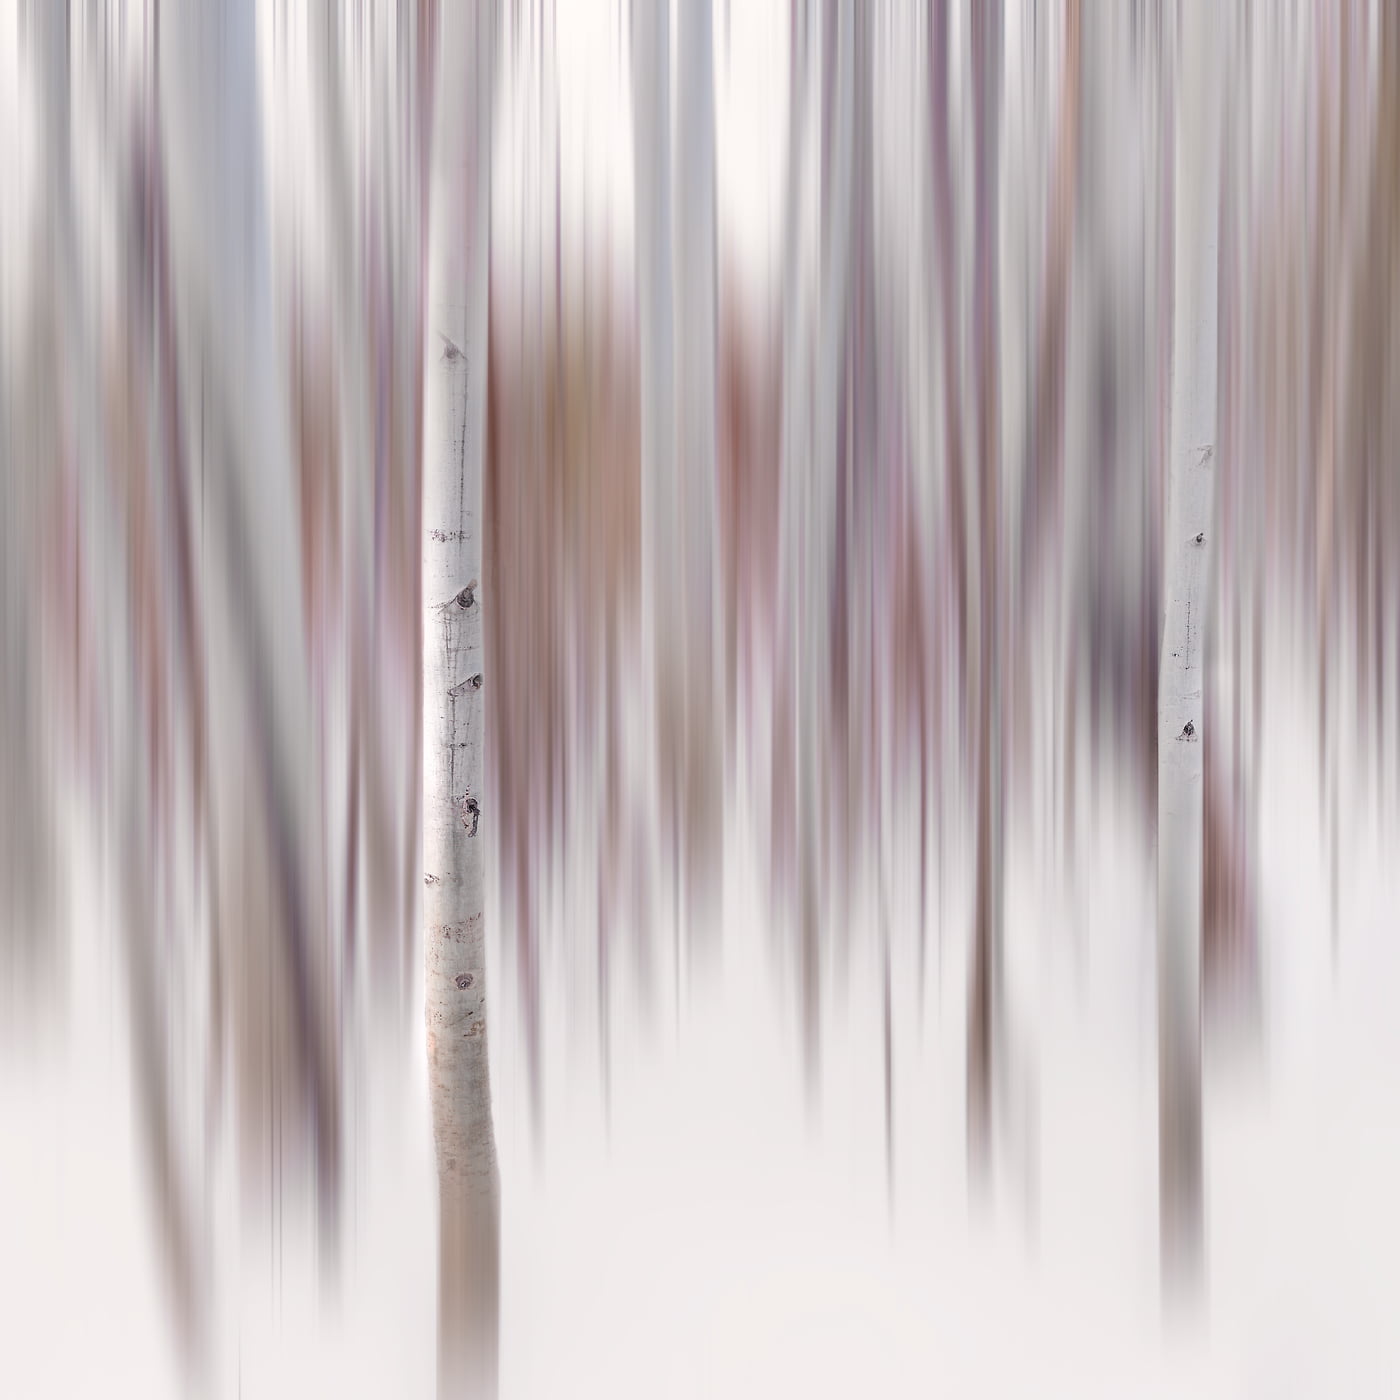 225 megapixels! A very high resolution, abstract photo of a grove of aspen trees; abstract nature photograph created by Francesco Emanuele Carucci.